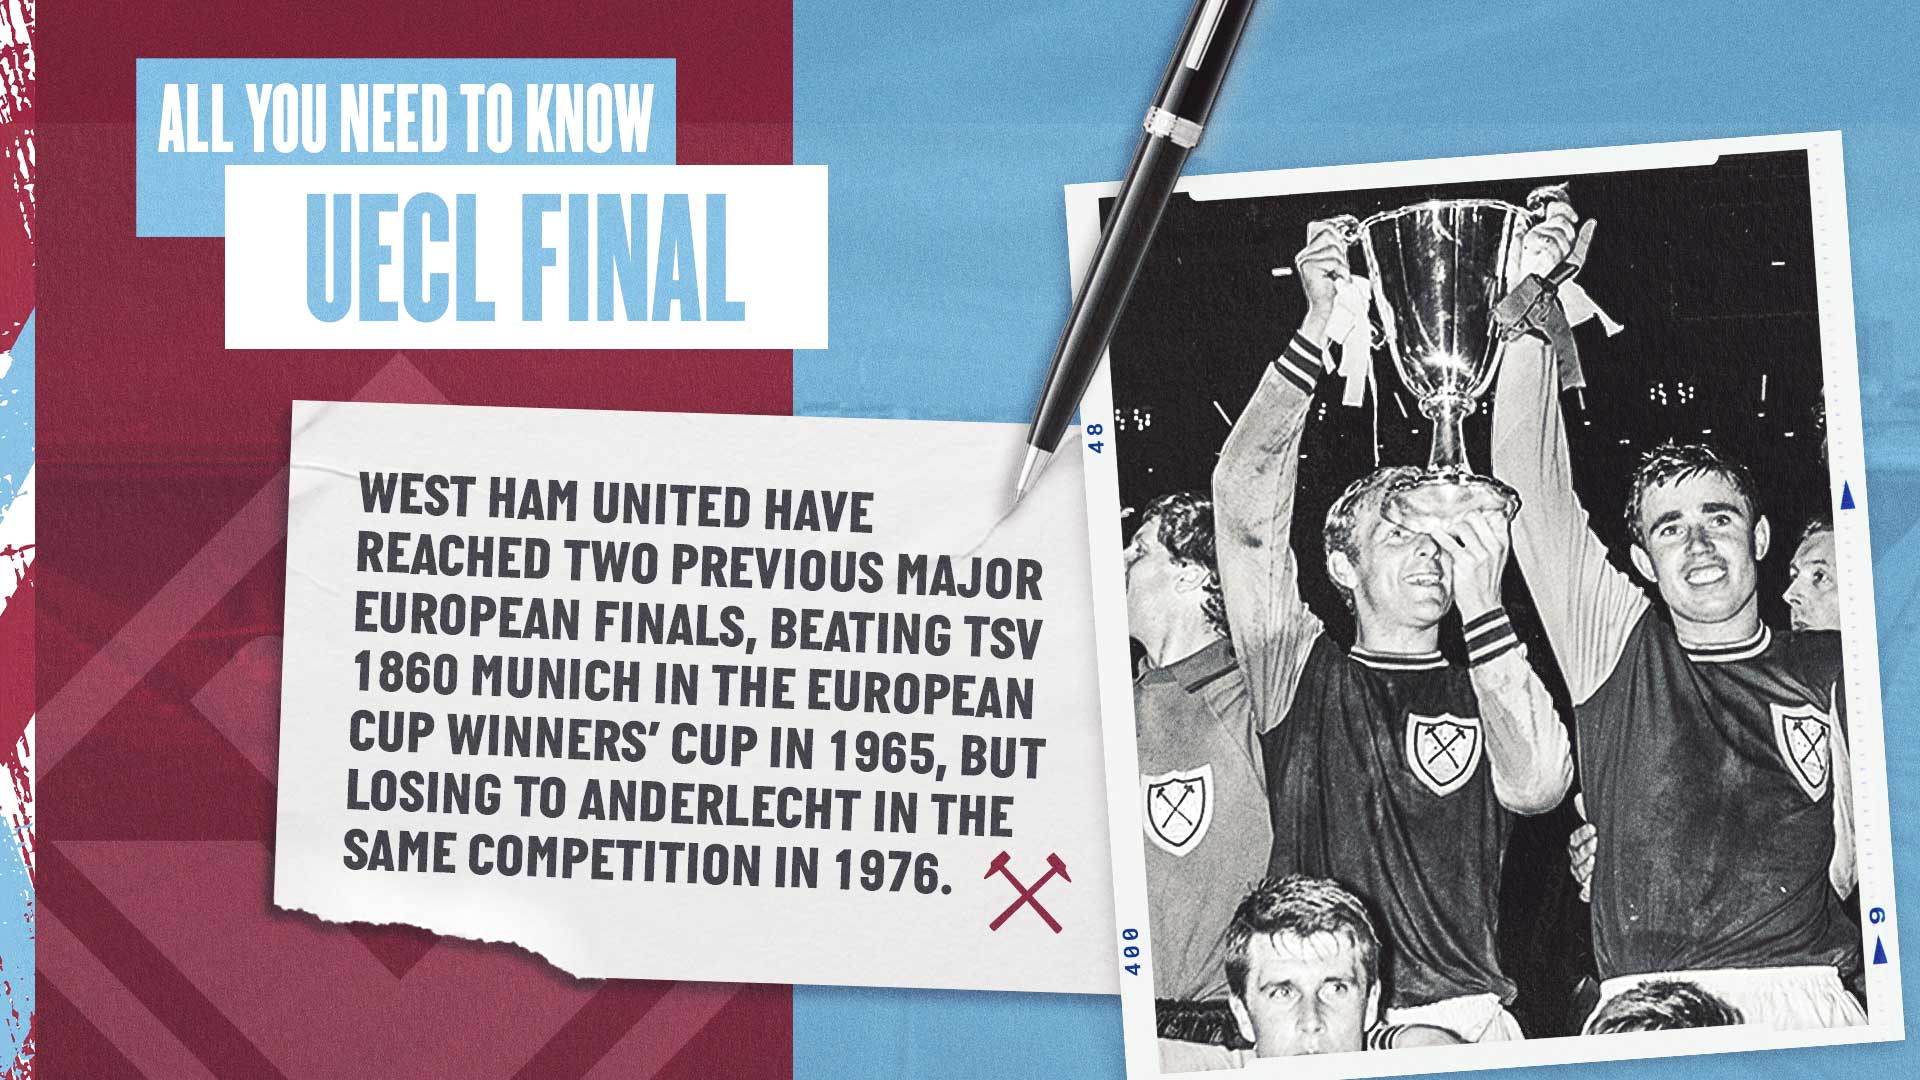 UEFA Europa Conference League final - All You Need To Know